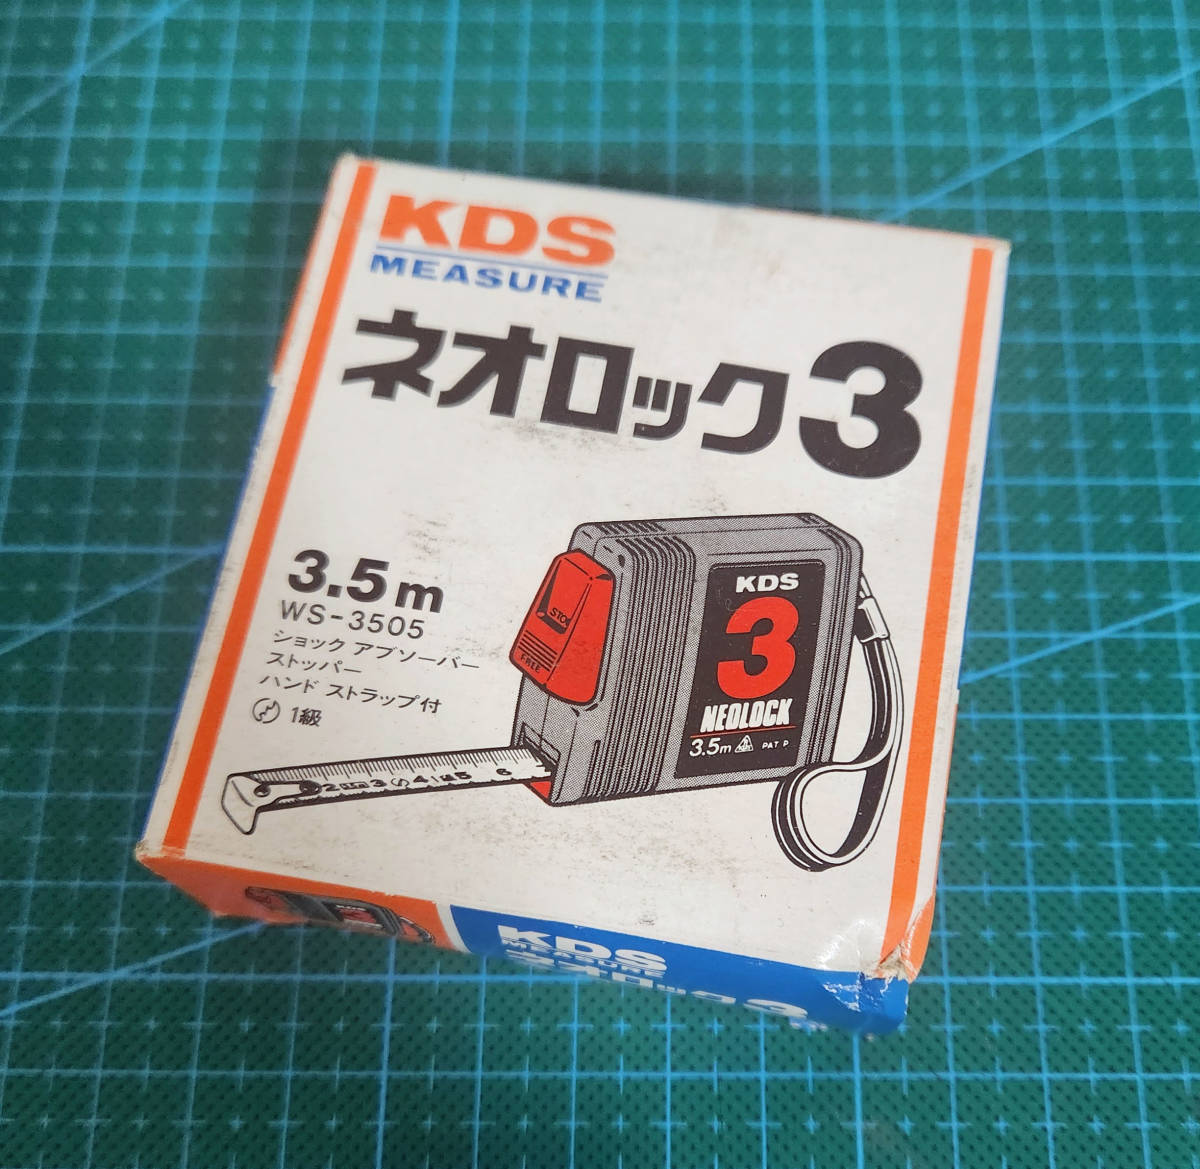 KDS　ネオロック3　3.5ｍ　WS-3505　新古品 /231128_画像1